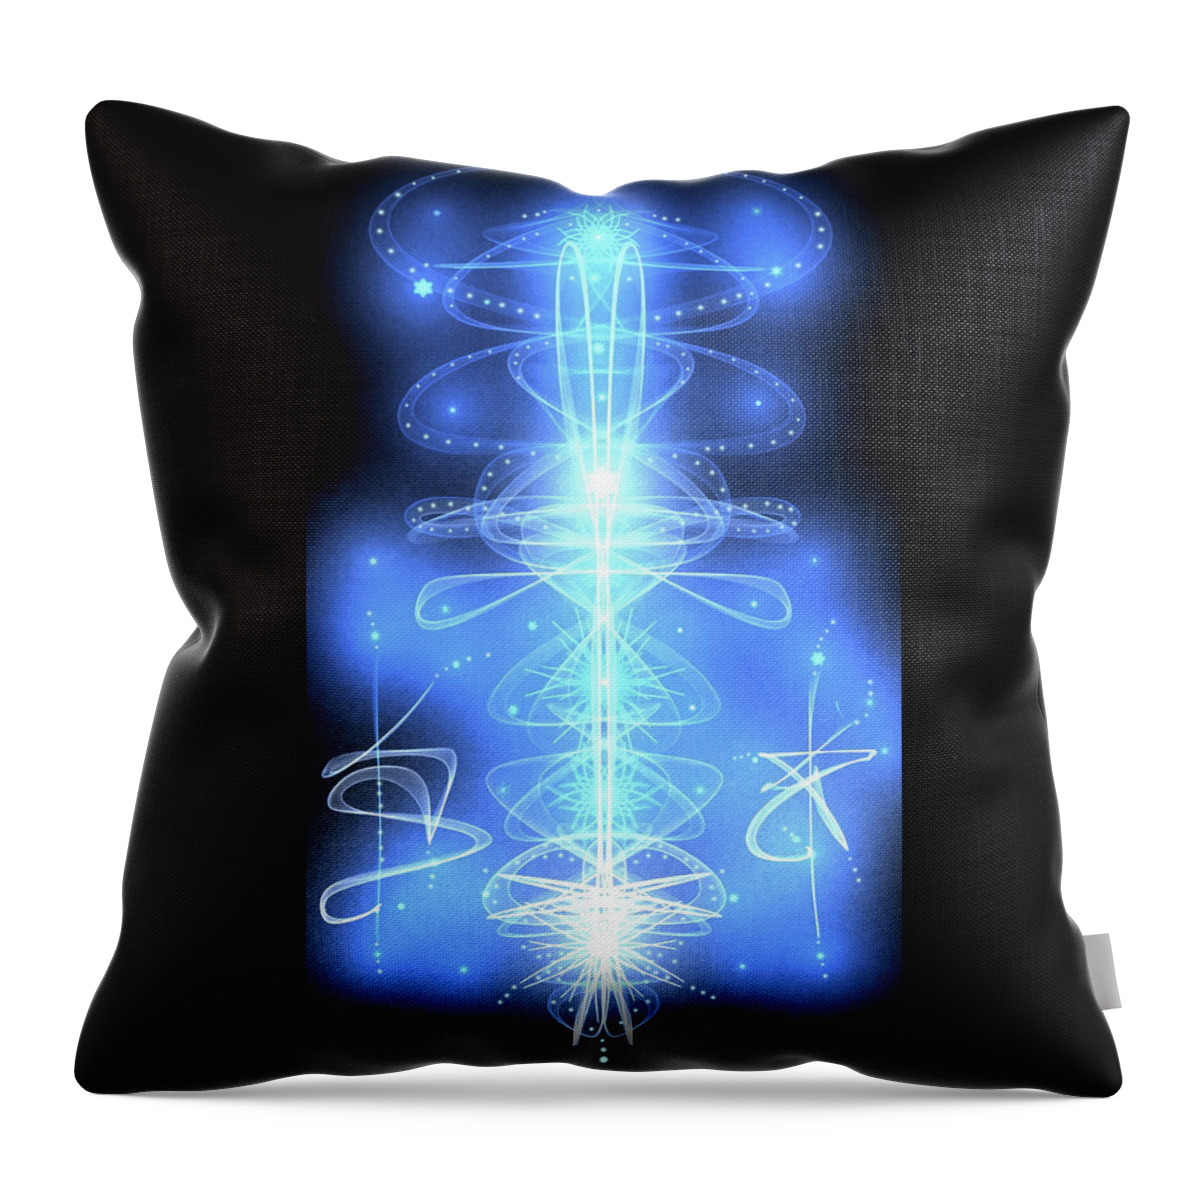  Throw Pillow featuring the digital art Blue Gateway to Stars by Kelley Springer